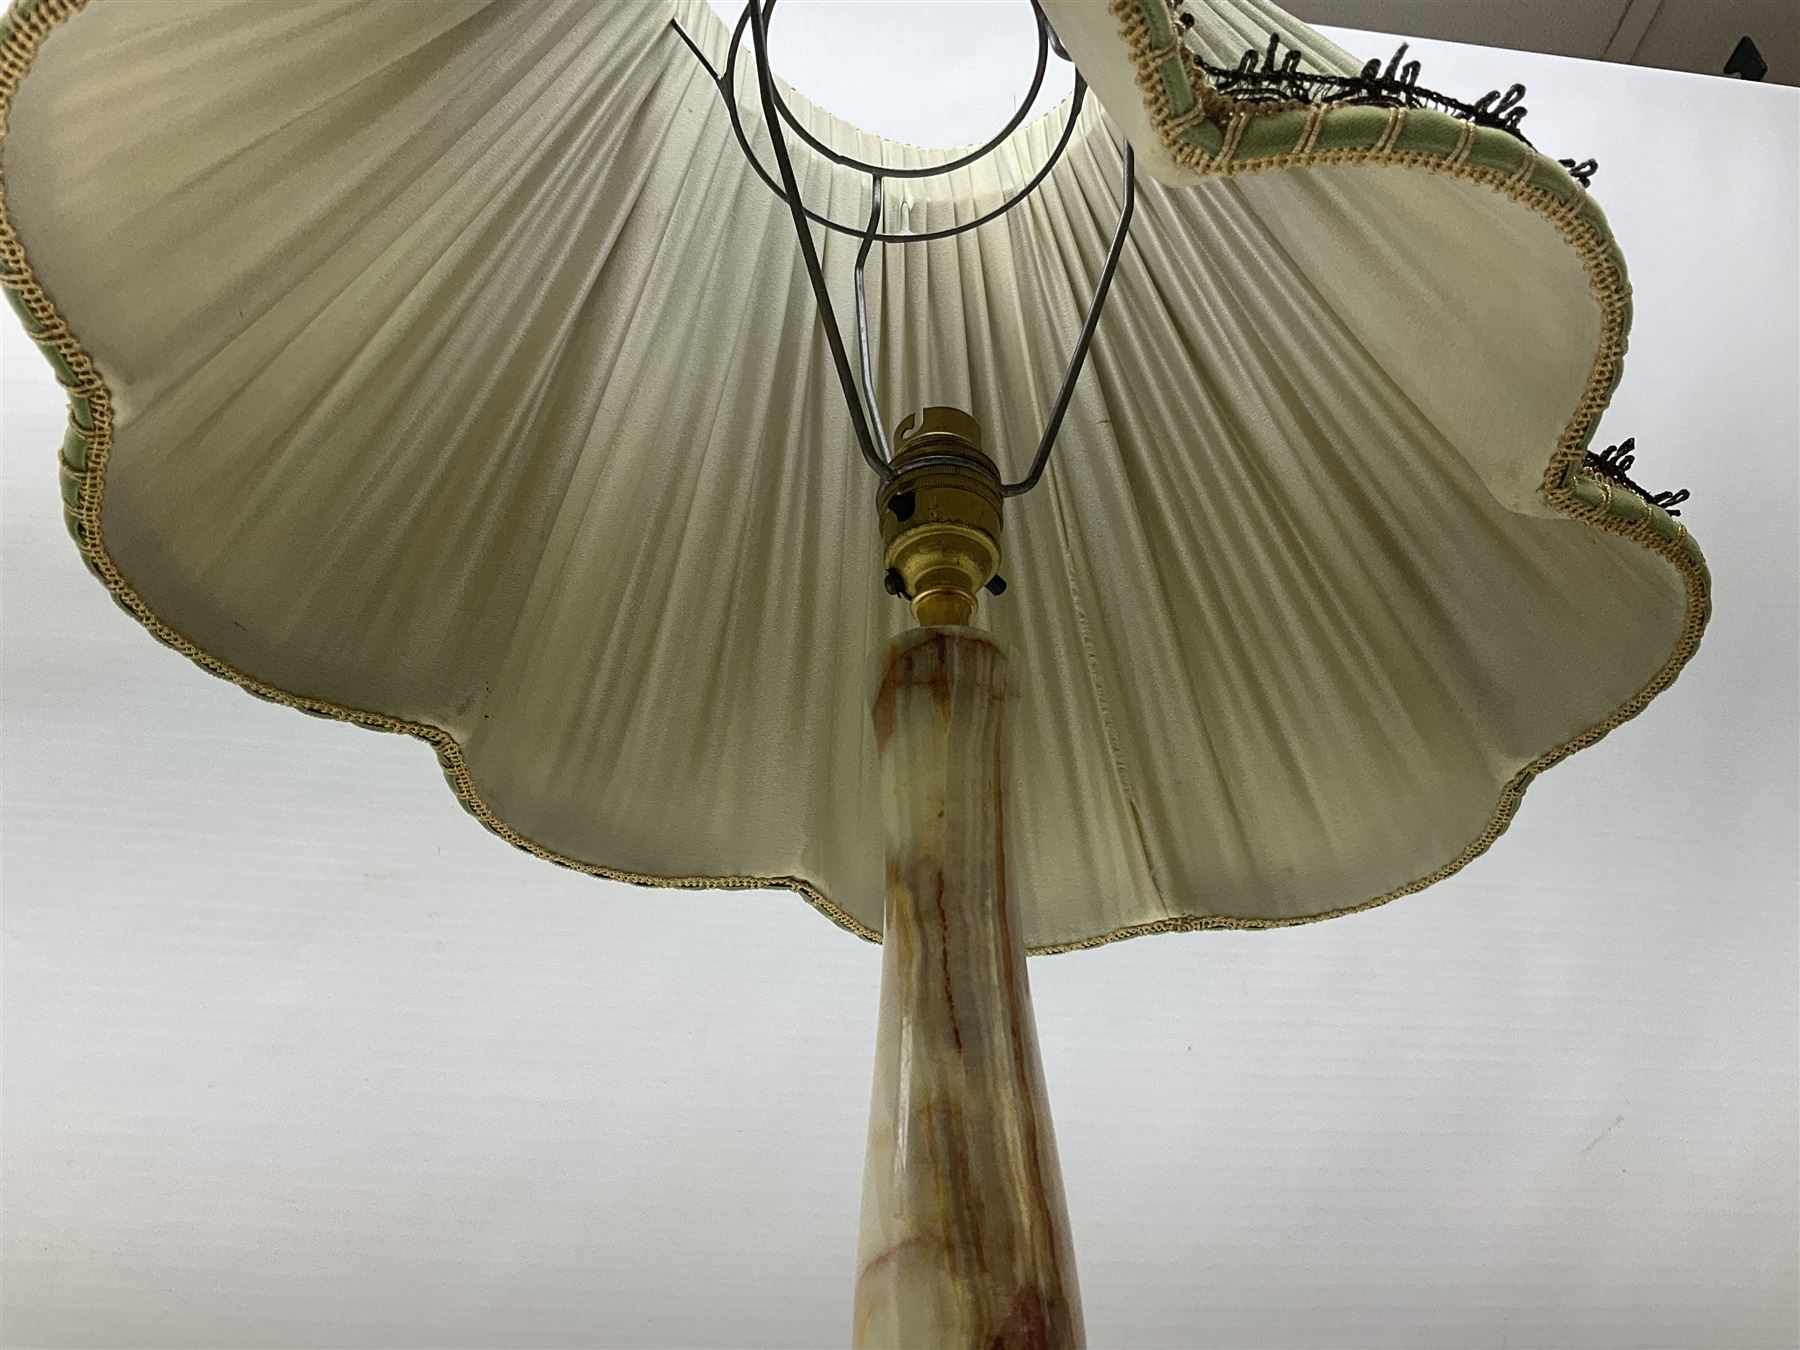 Floor lamp with brass and onyx central column - Image 7 of 9